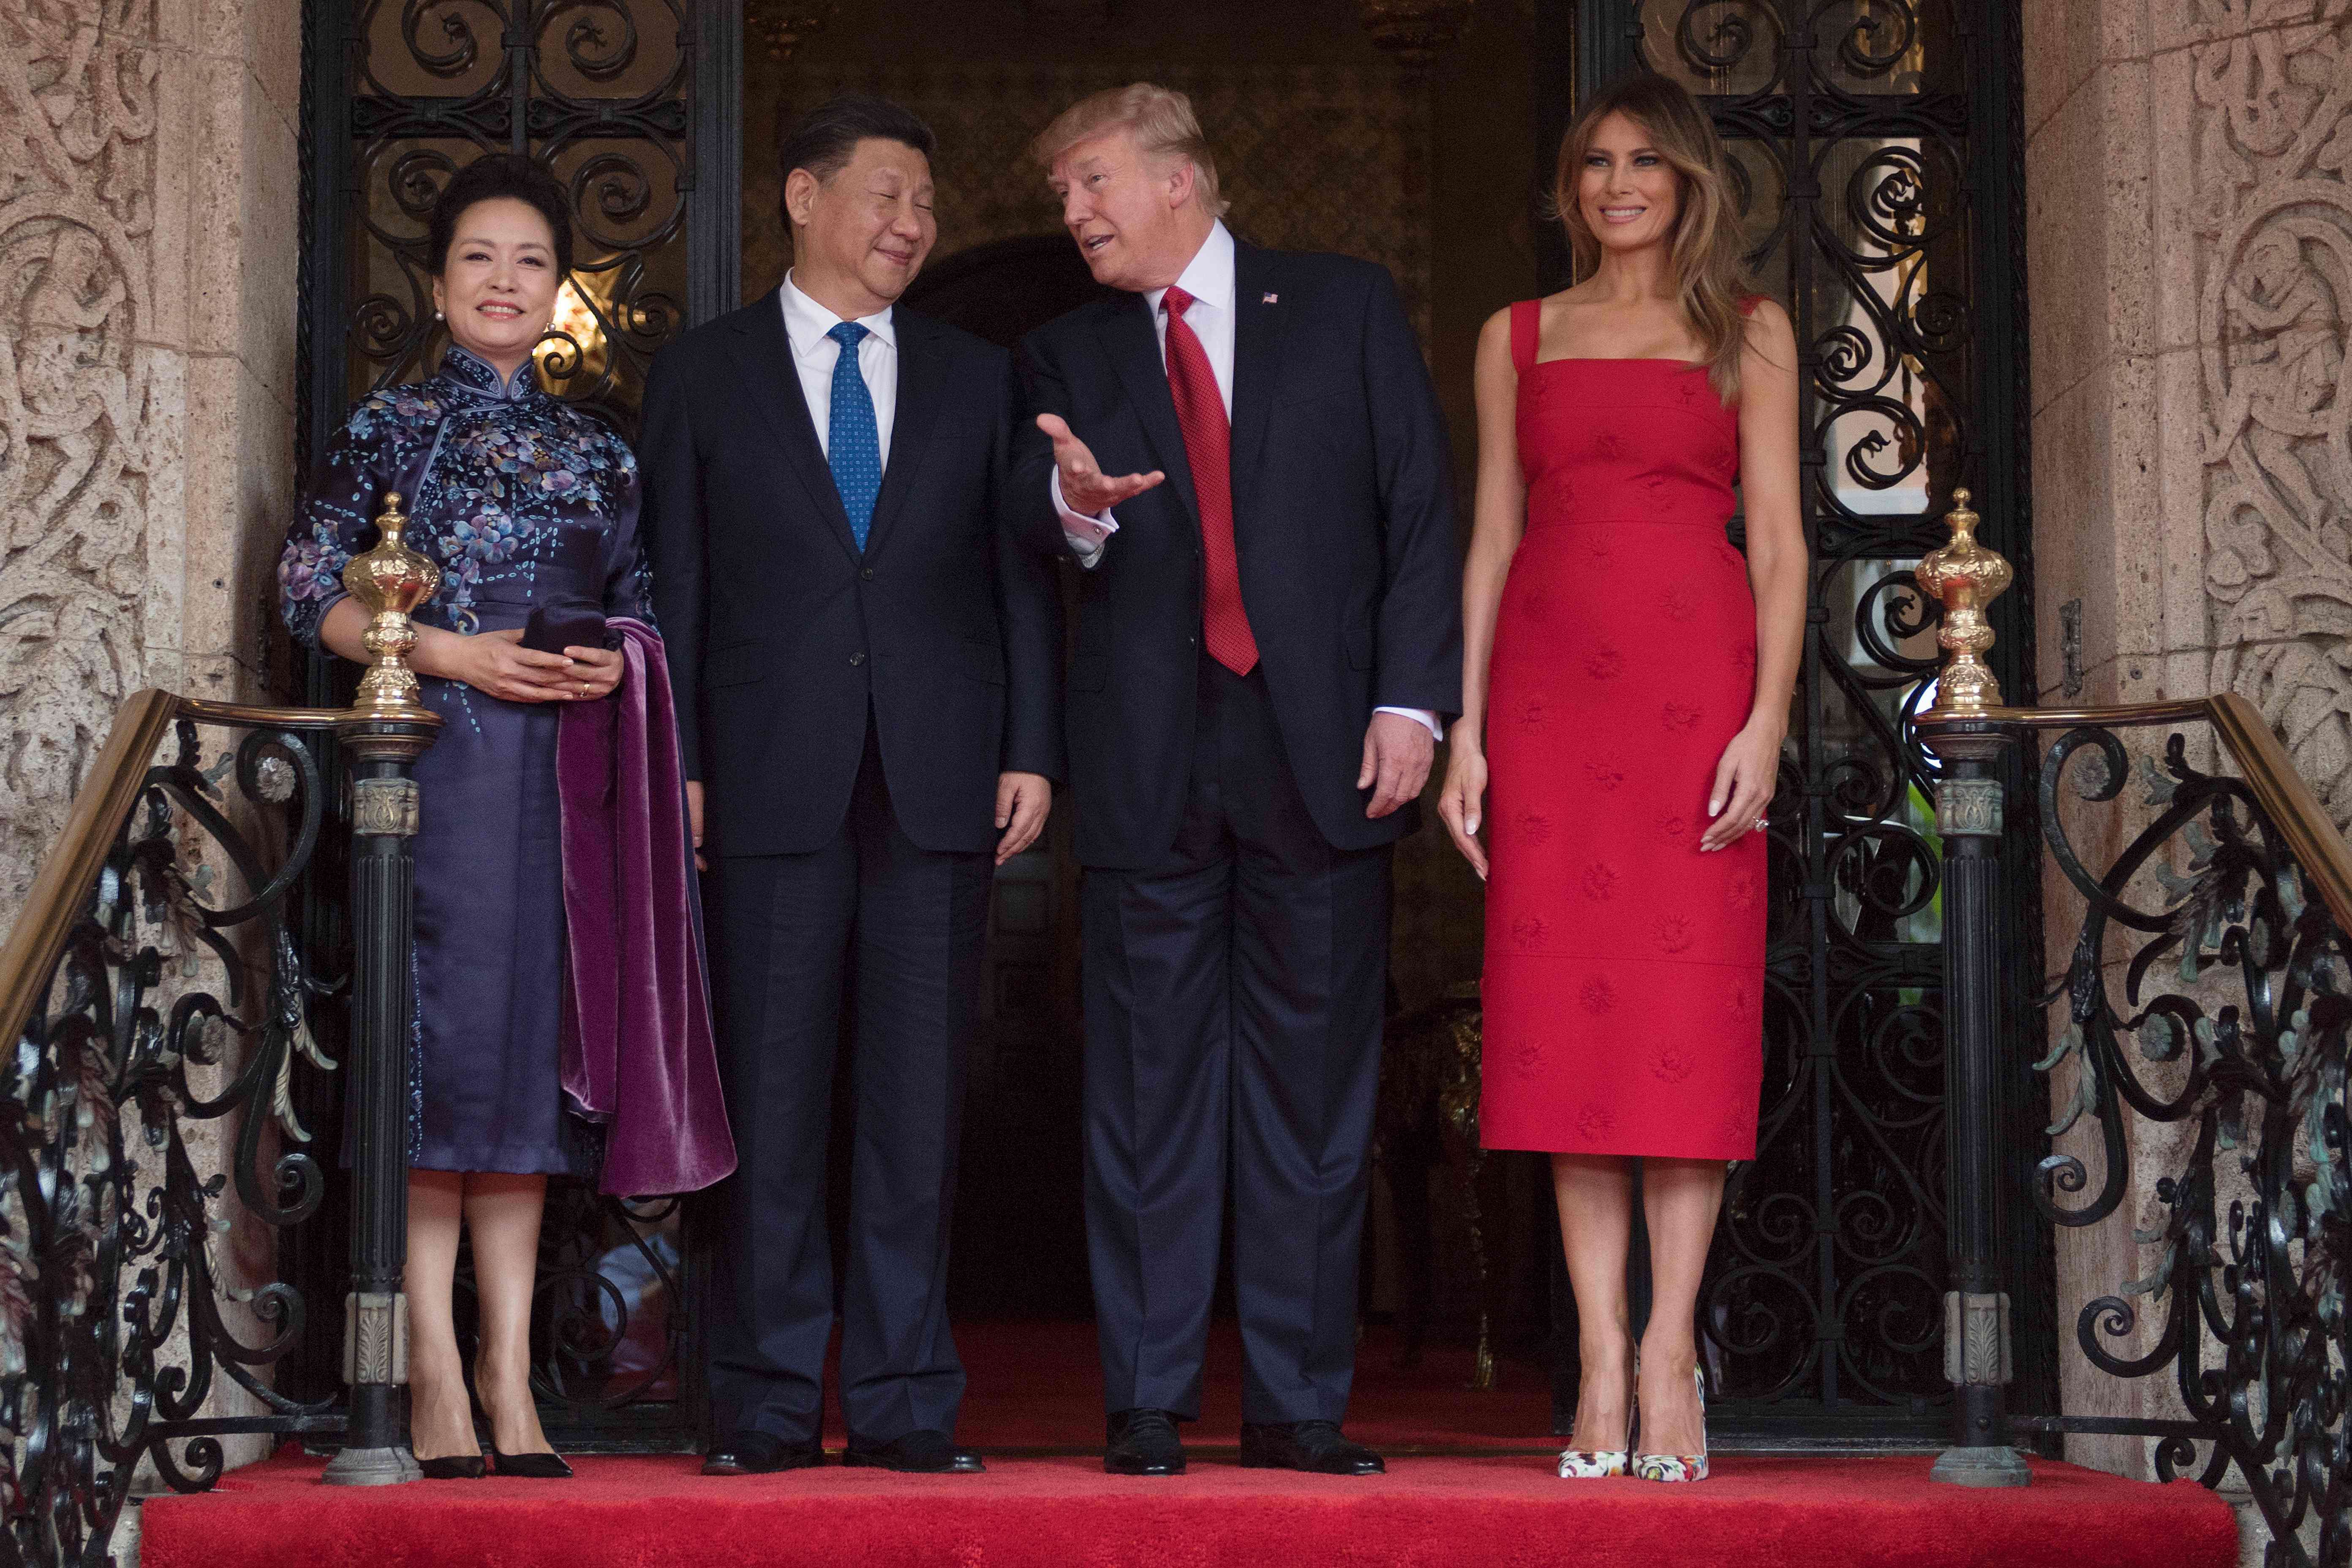 US First Lady Melania Trump (right) and President Donald Trump (second right) pose with Chinese President Xi Jinping (second left) and his wife Peng Liyuan (left) at the Mar-a-Lago estate in Palm Beach. Photo: AFP